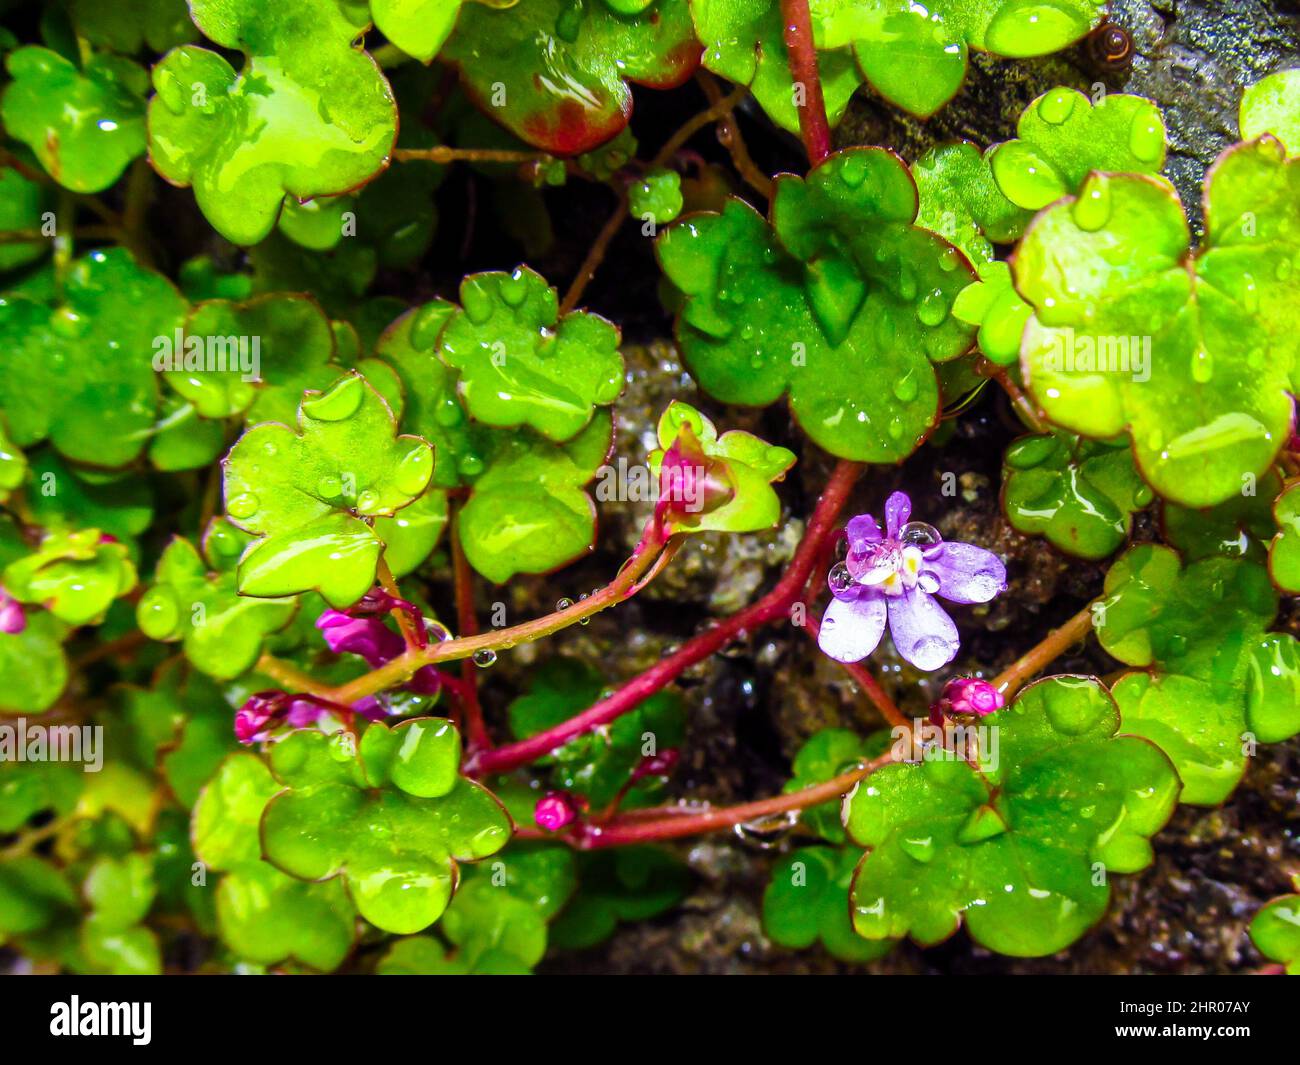 Flowering Ivy-leaved Toadflux, Cymbalaria muralis, covered in water droplets growing out of an old dry wall in the Lake District, UK Stock Photo